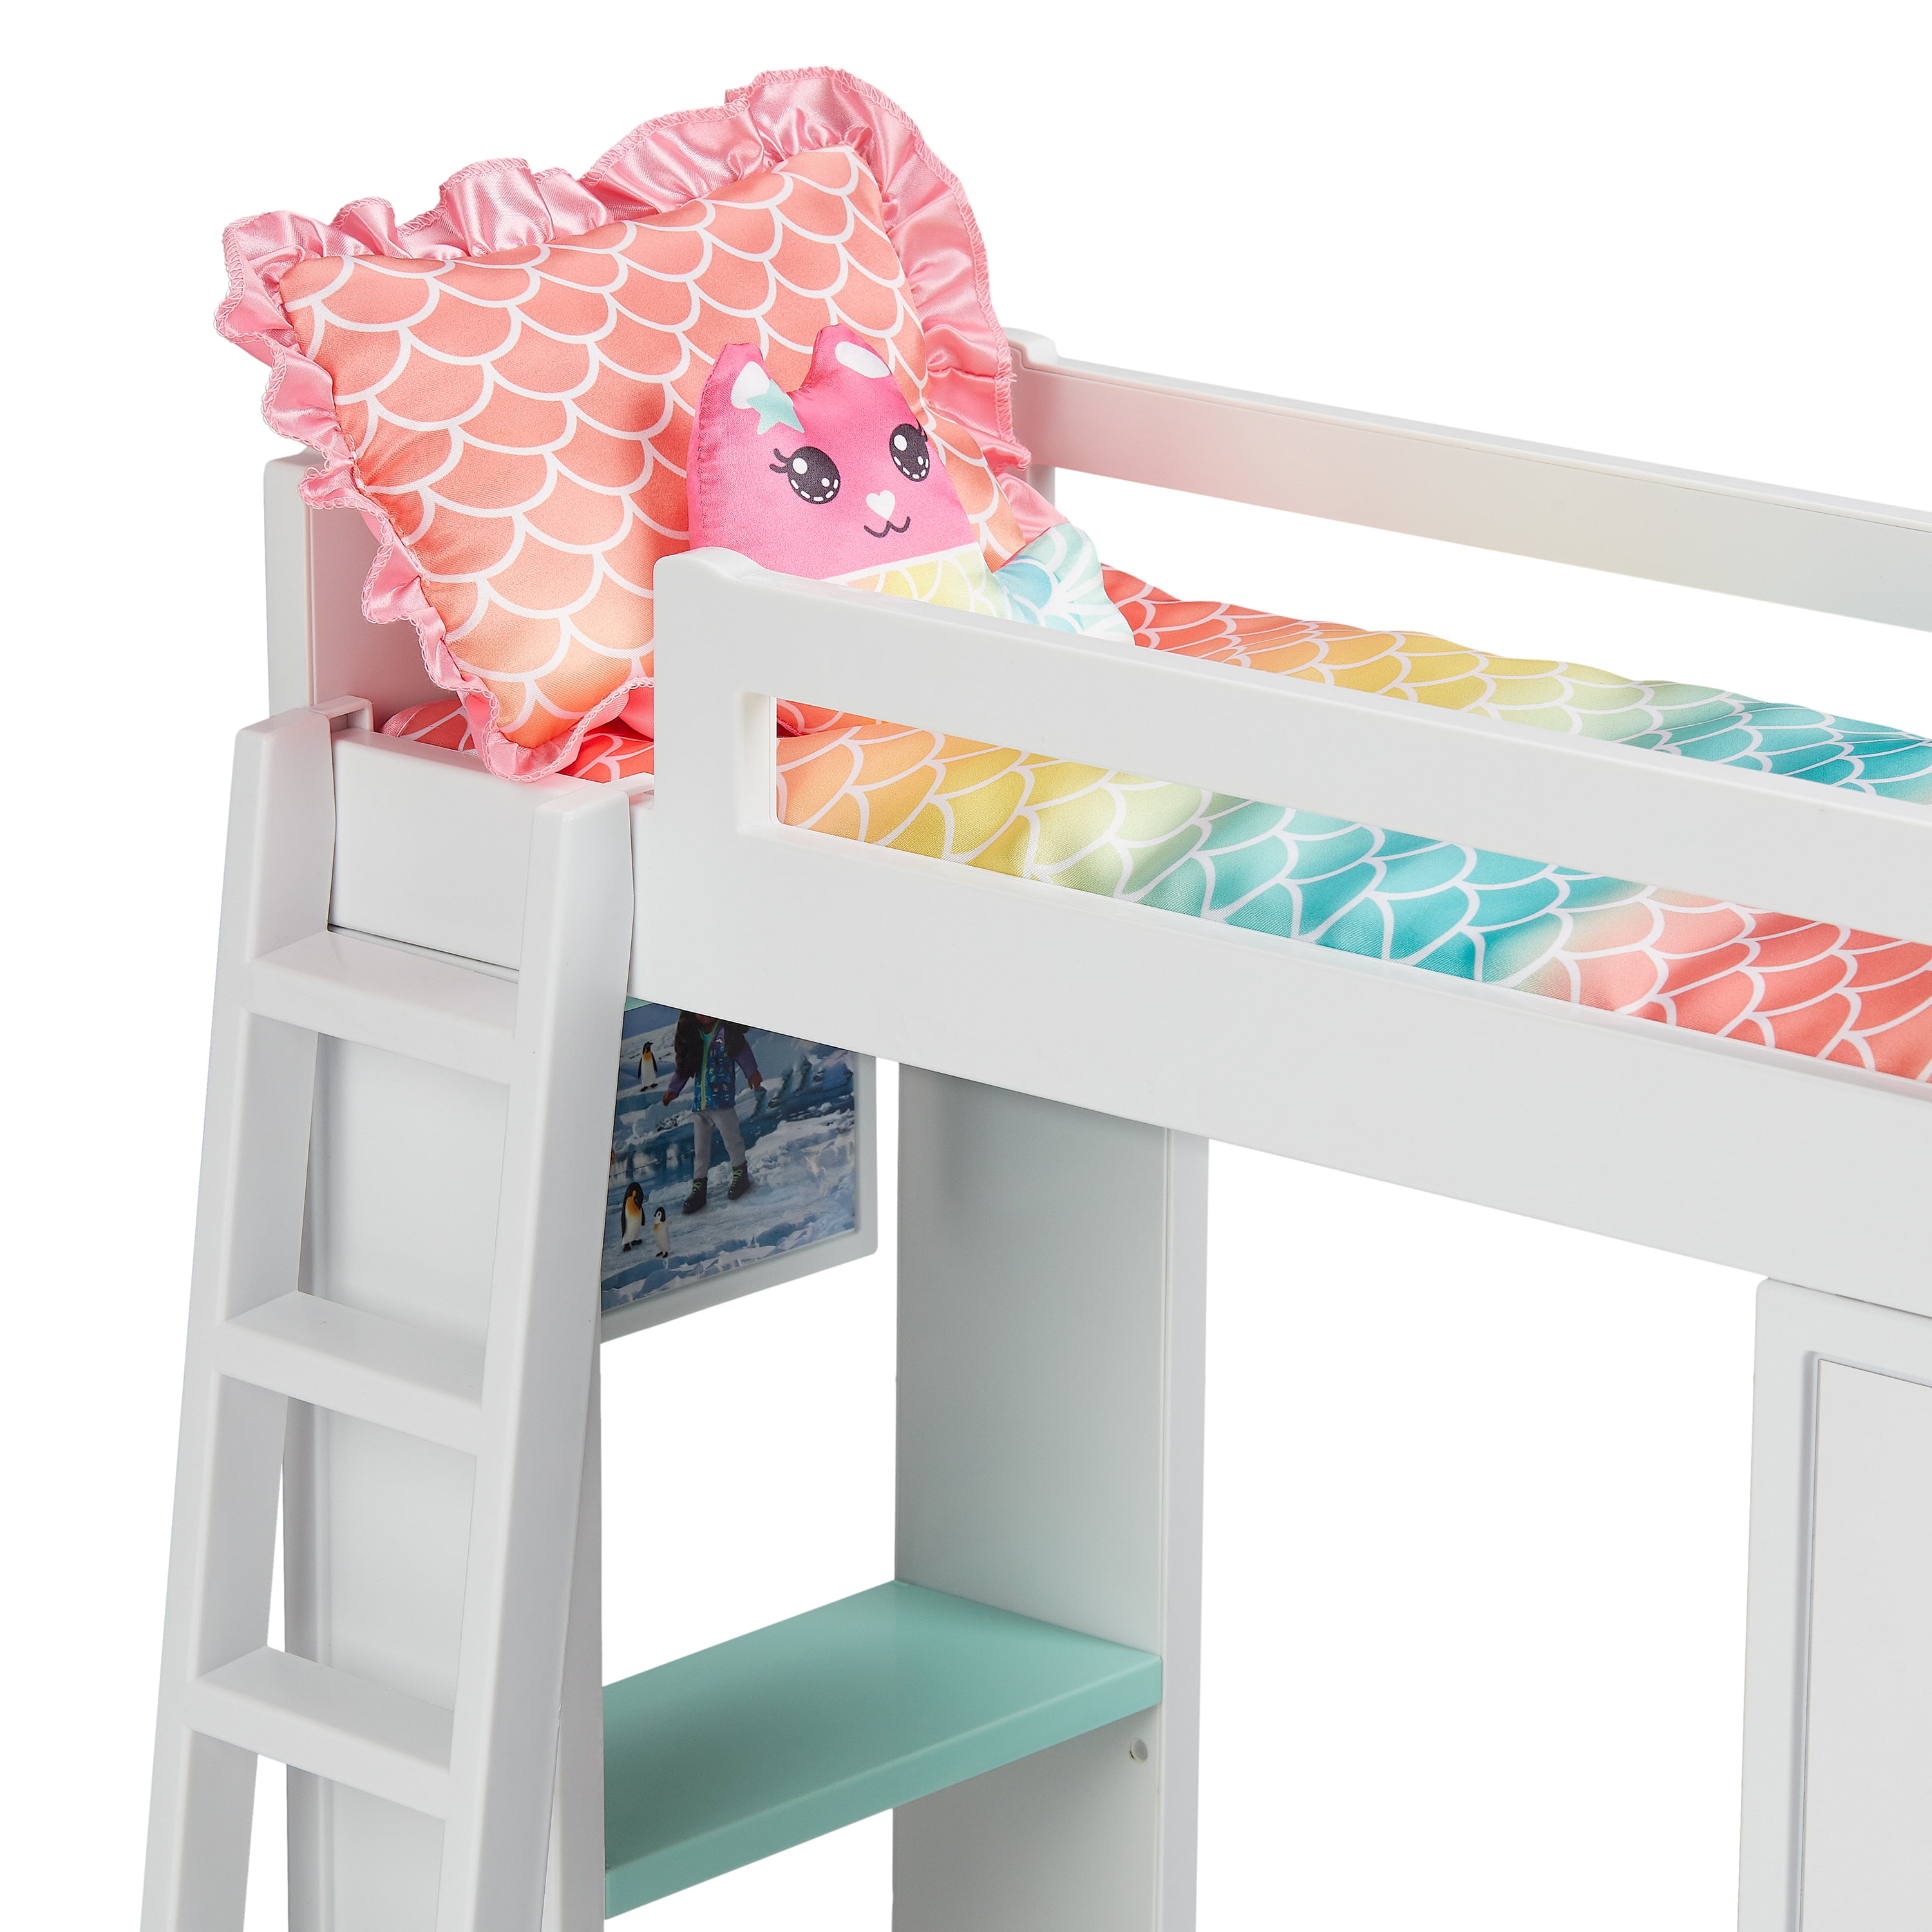 My Life As Loft Bed Play Set For 18, Baby Alive Bunk Beds